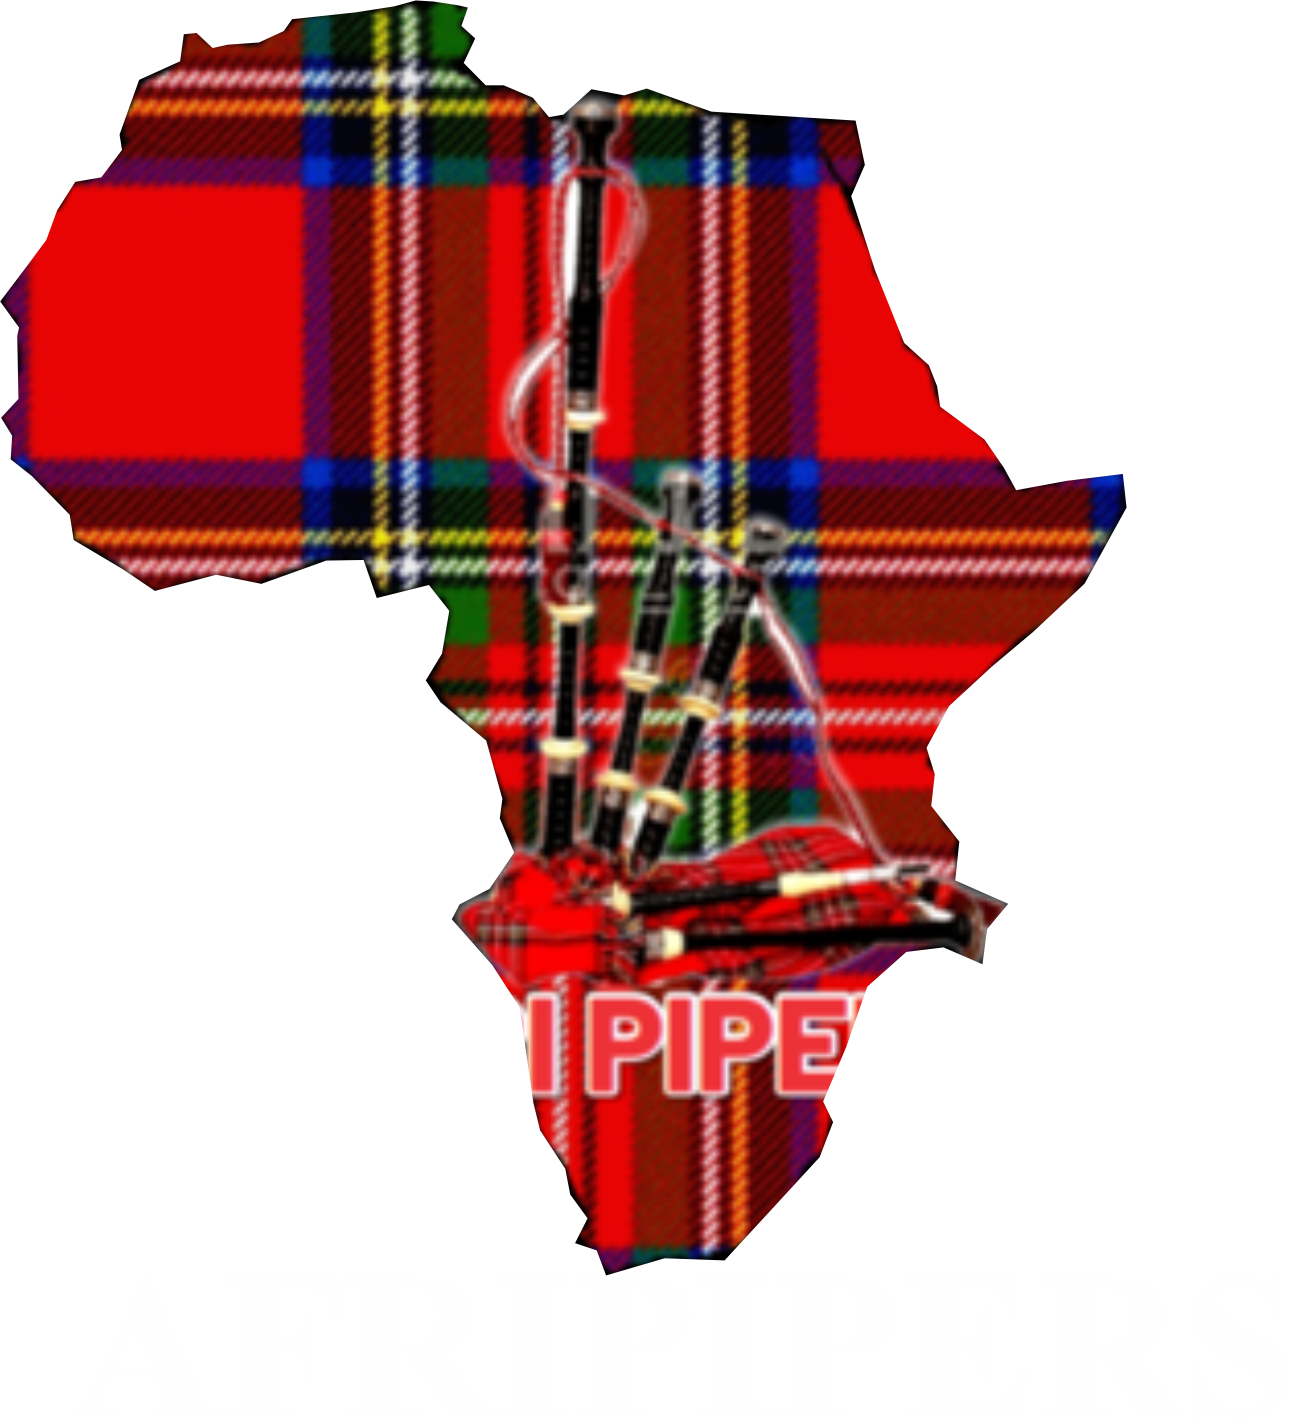 Afri pipers